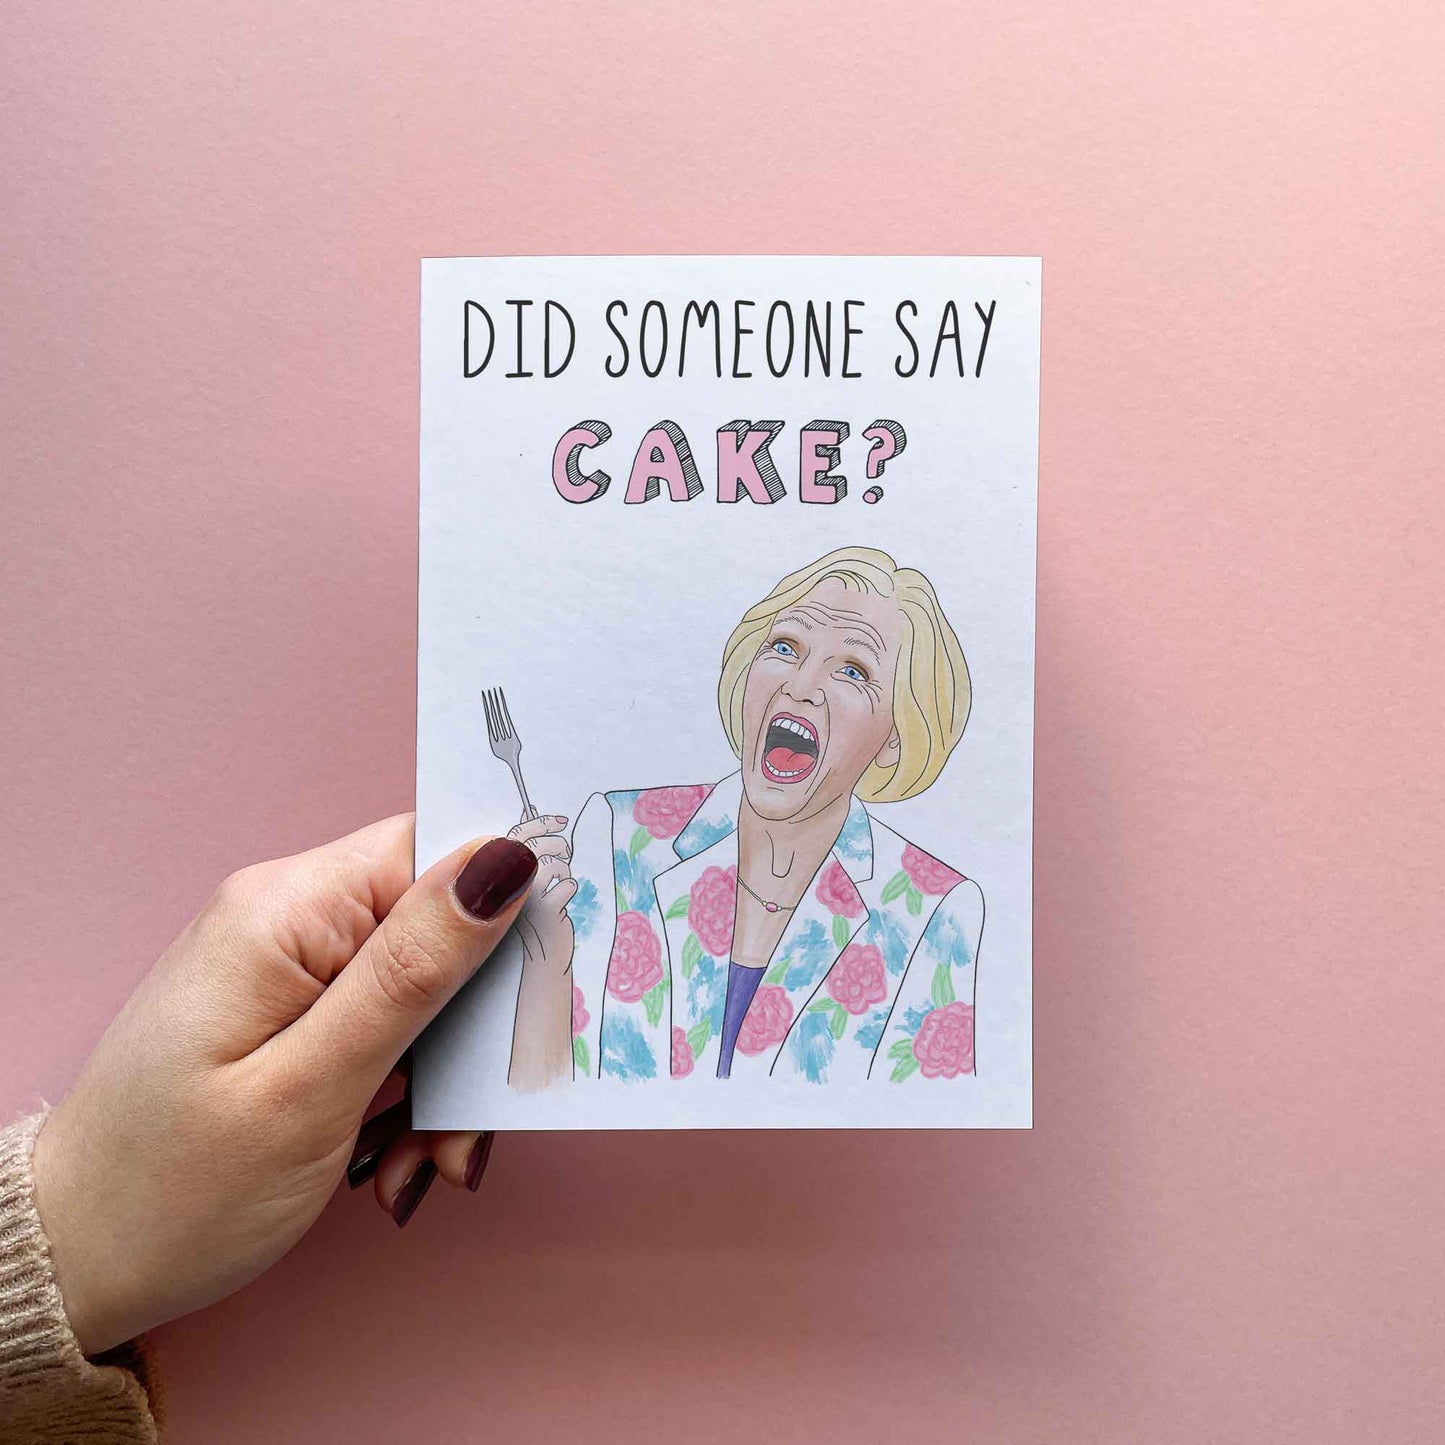 Funny Birthday Card for mum. Birthday greetings for sister funny or birthday wishes for best friend. Birthday wishes card reading "did somebody say cake?" featuring water colour of star baker berry by sketchy print co. Card held in hand for size reference.